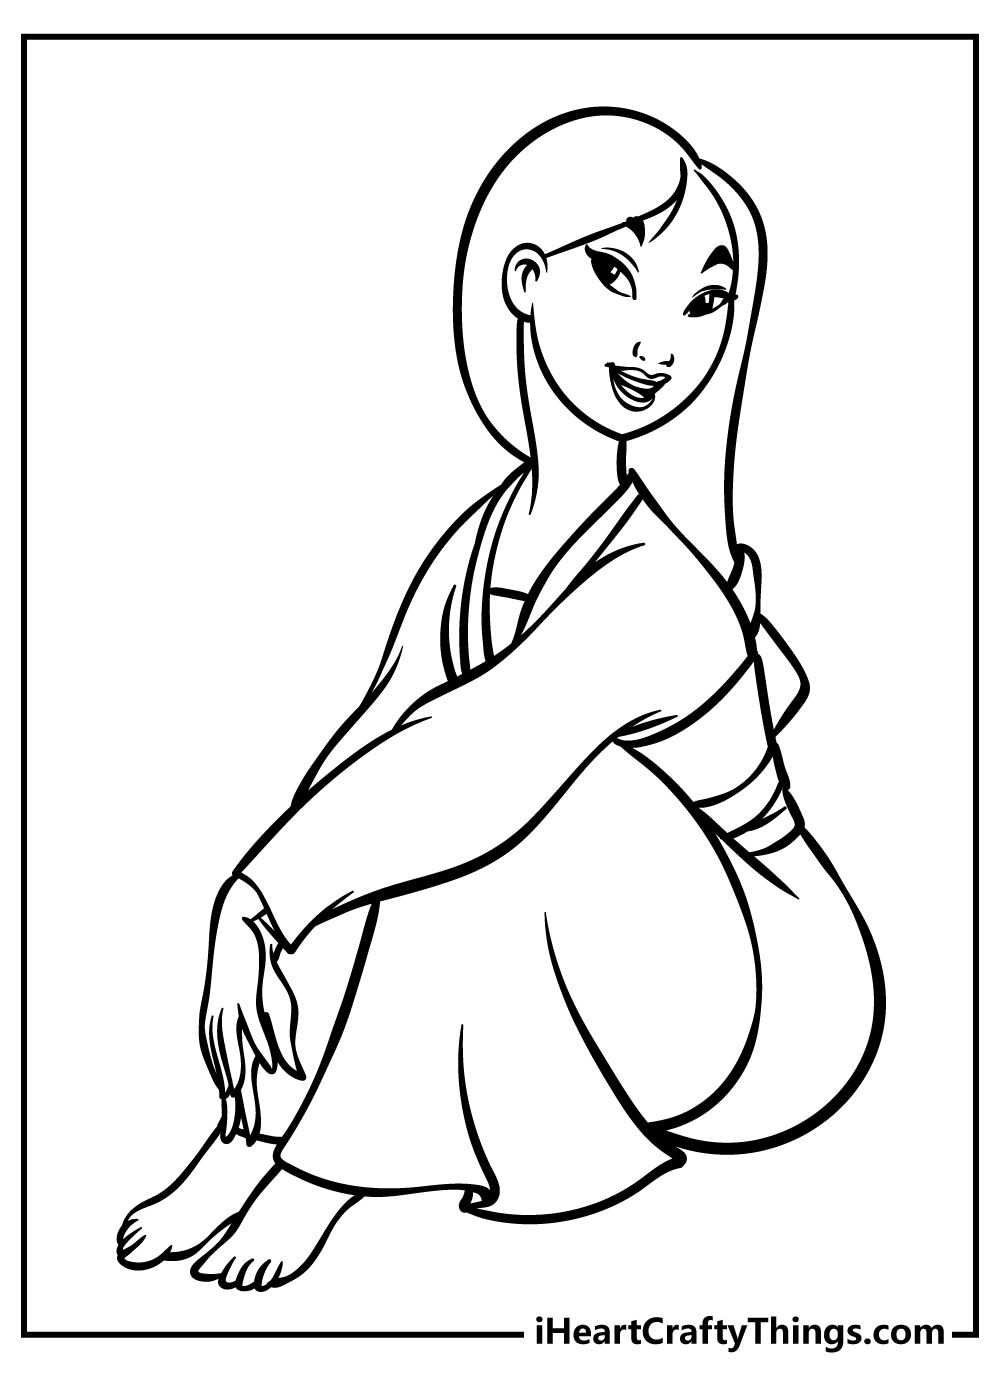 Mulan Coloring Pages for adults free printable